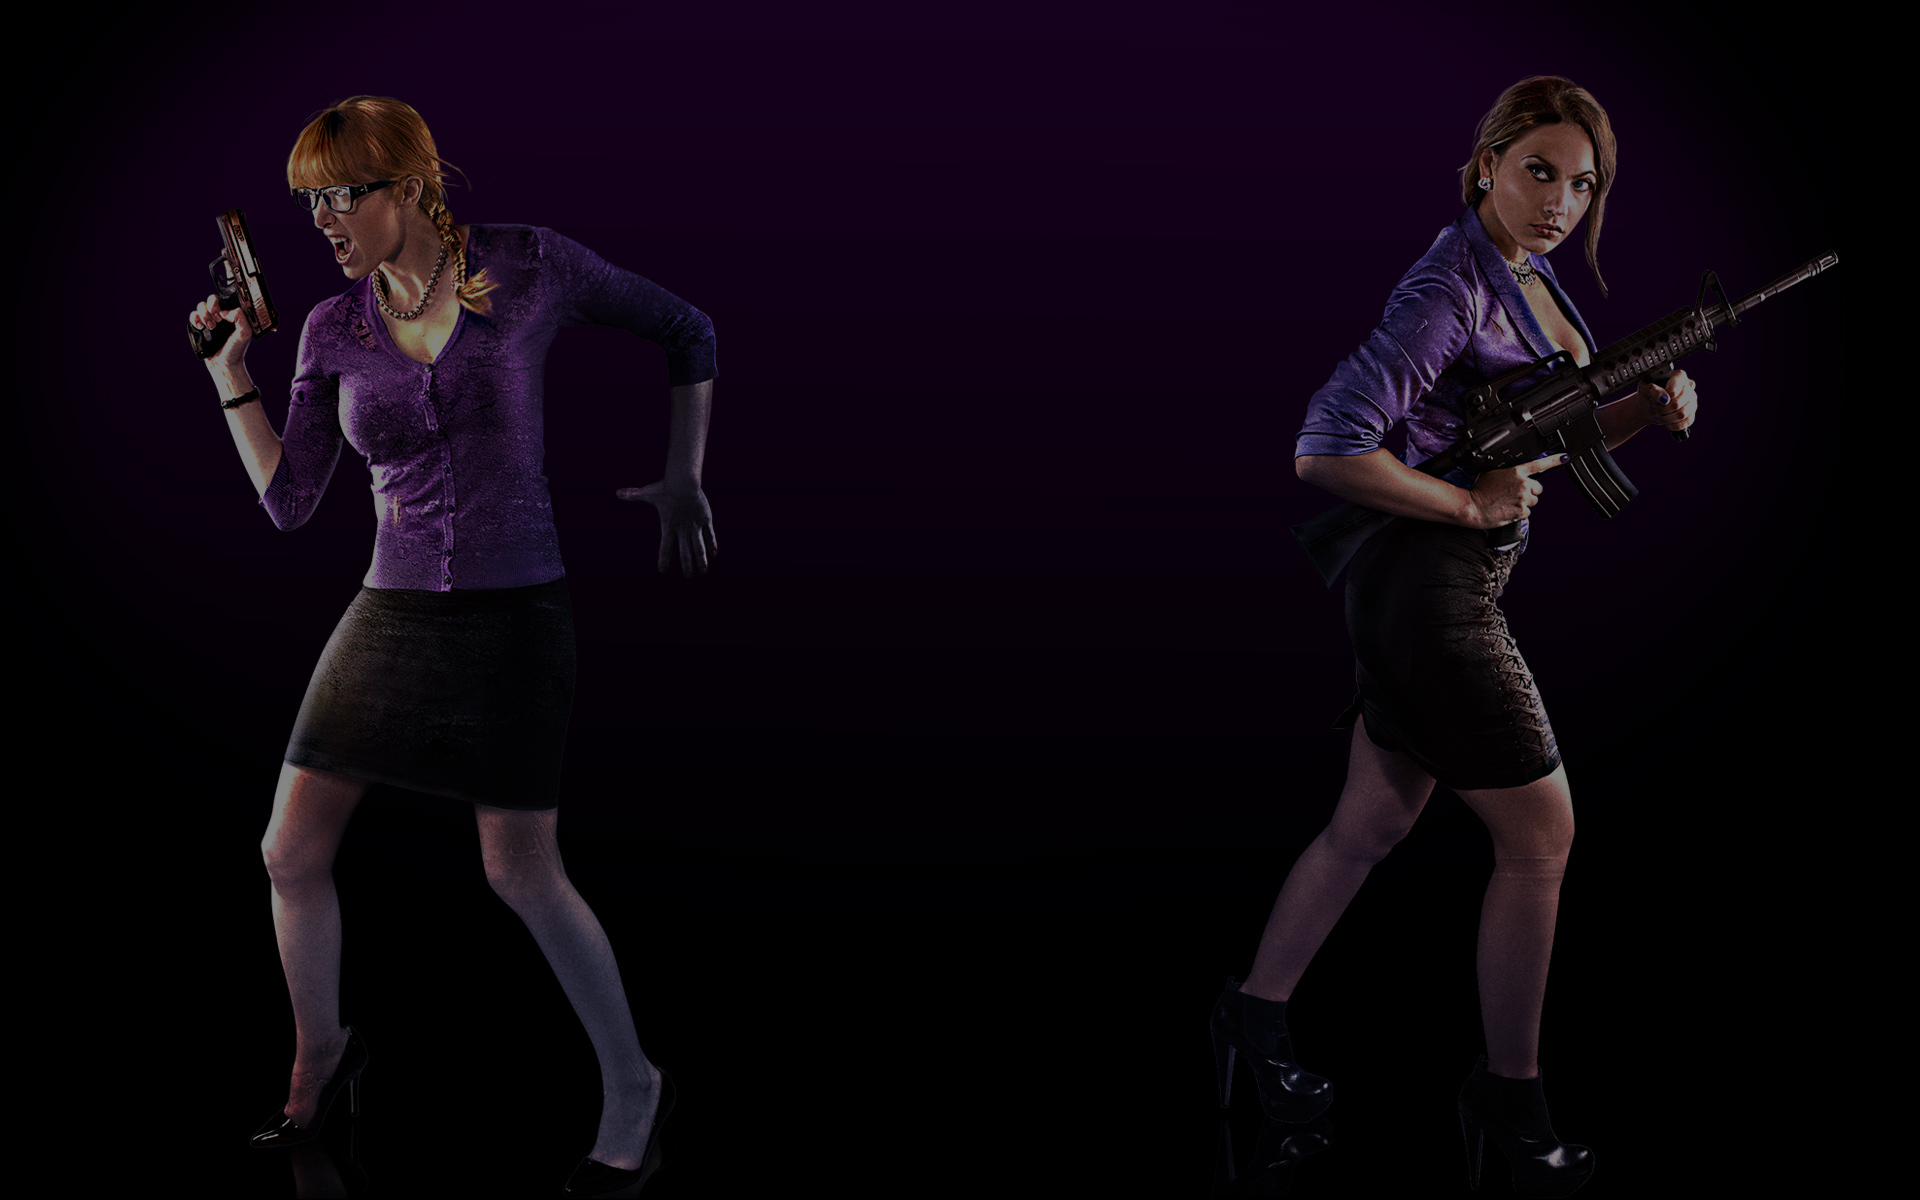 Video Game Saints Row IV HD Wallpaper | Background Image